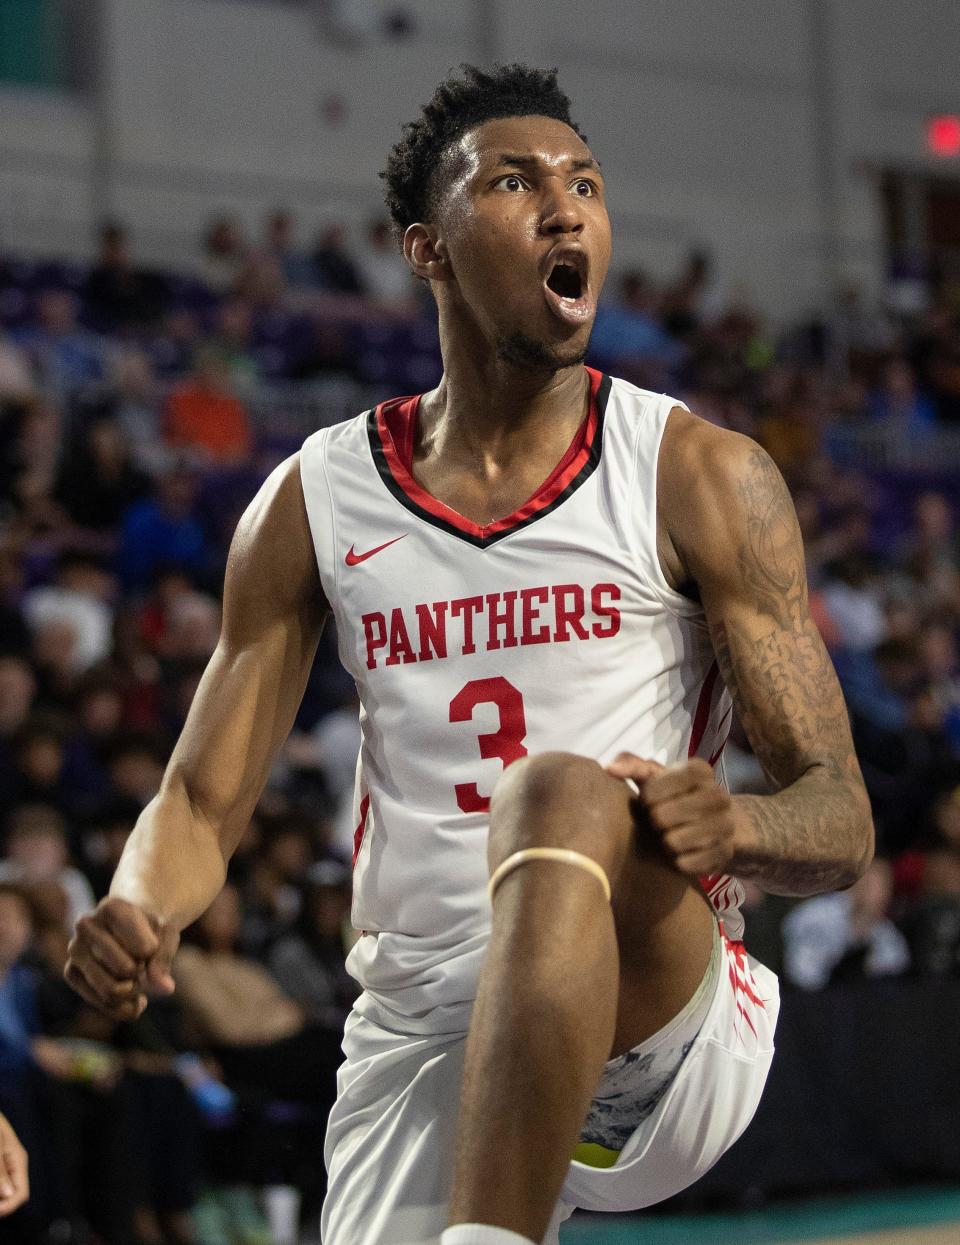 Justin Edwards of Imhotep Charter celebrates after a dunk against Christopher Columbus in the City of Palms Classic Championship game on Wednesday, Dec. 21, 2022, at Suncoast Credit Union Arena in Fort Myers.